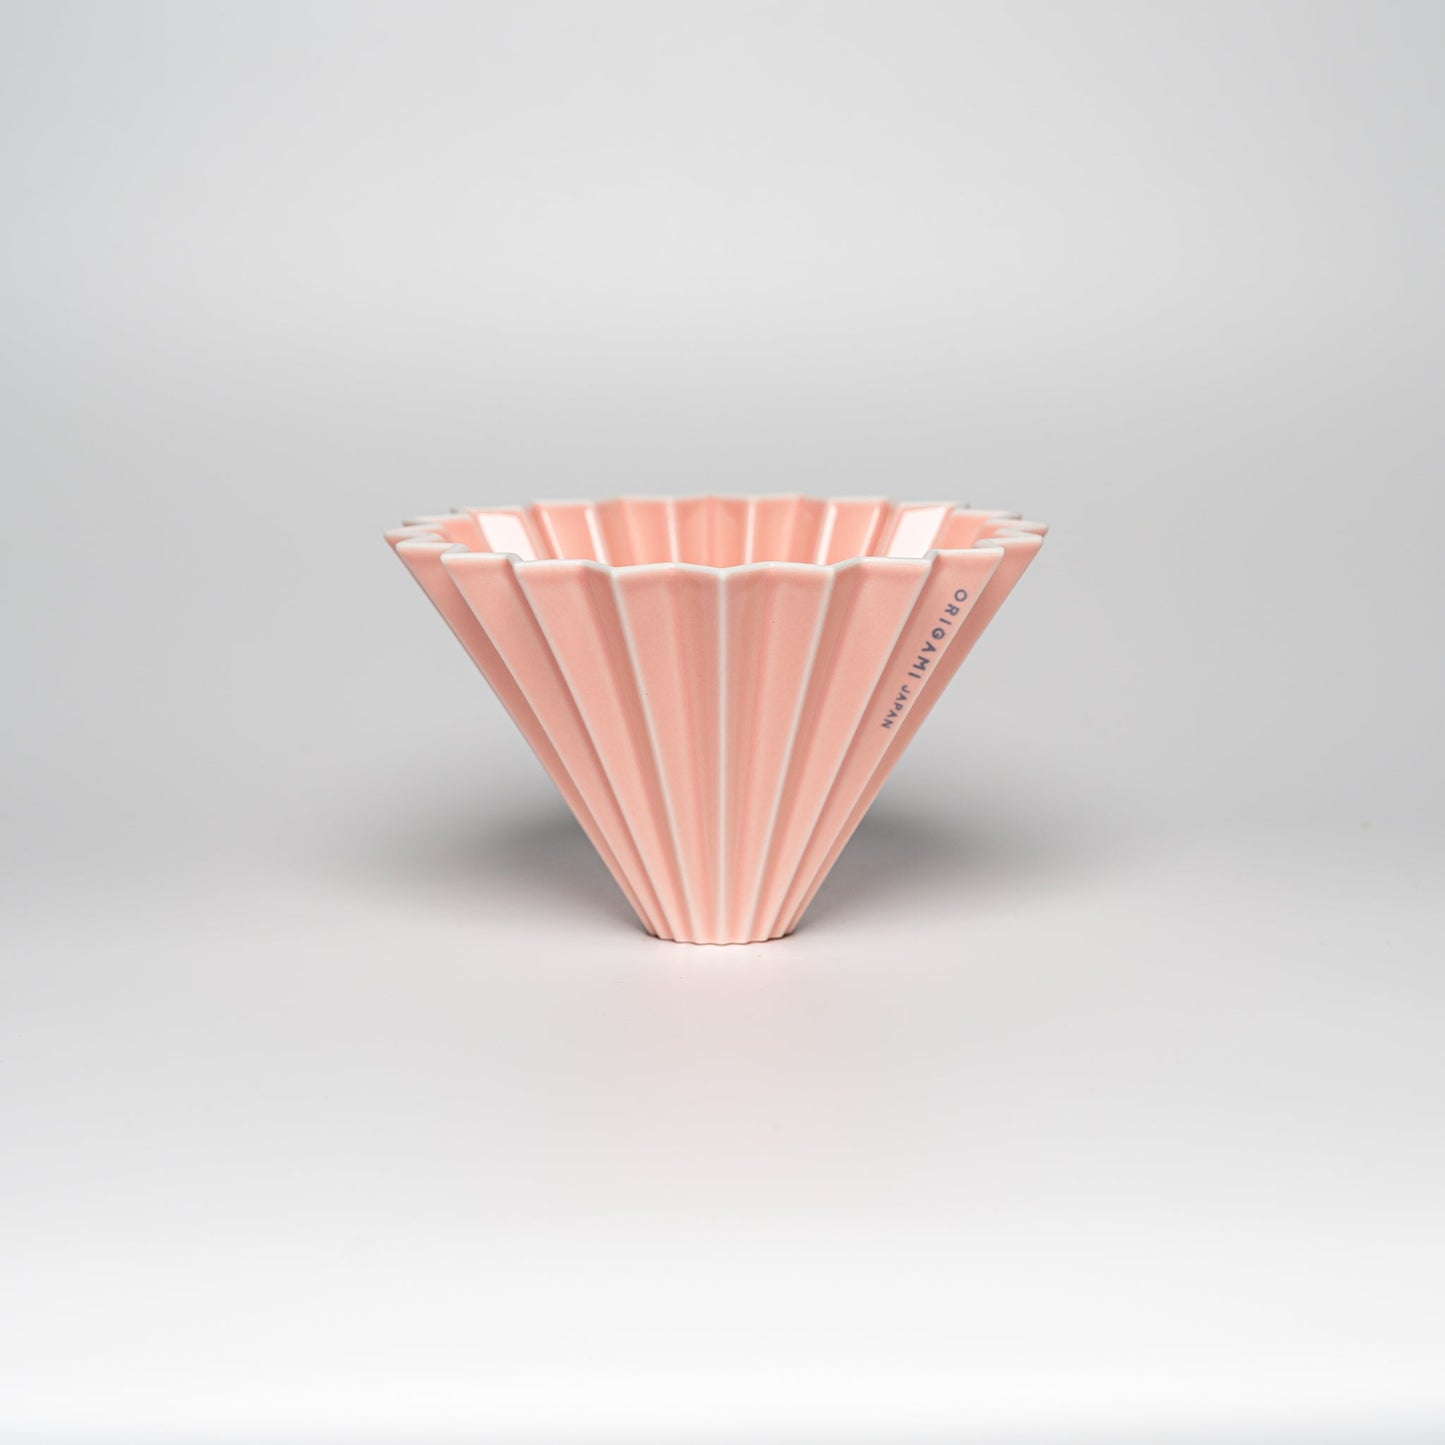 A matte pink ORIGAMI coffee dripper on a white background